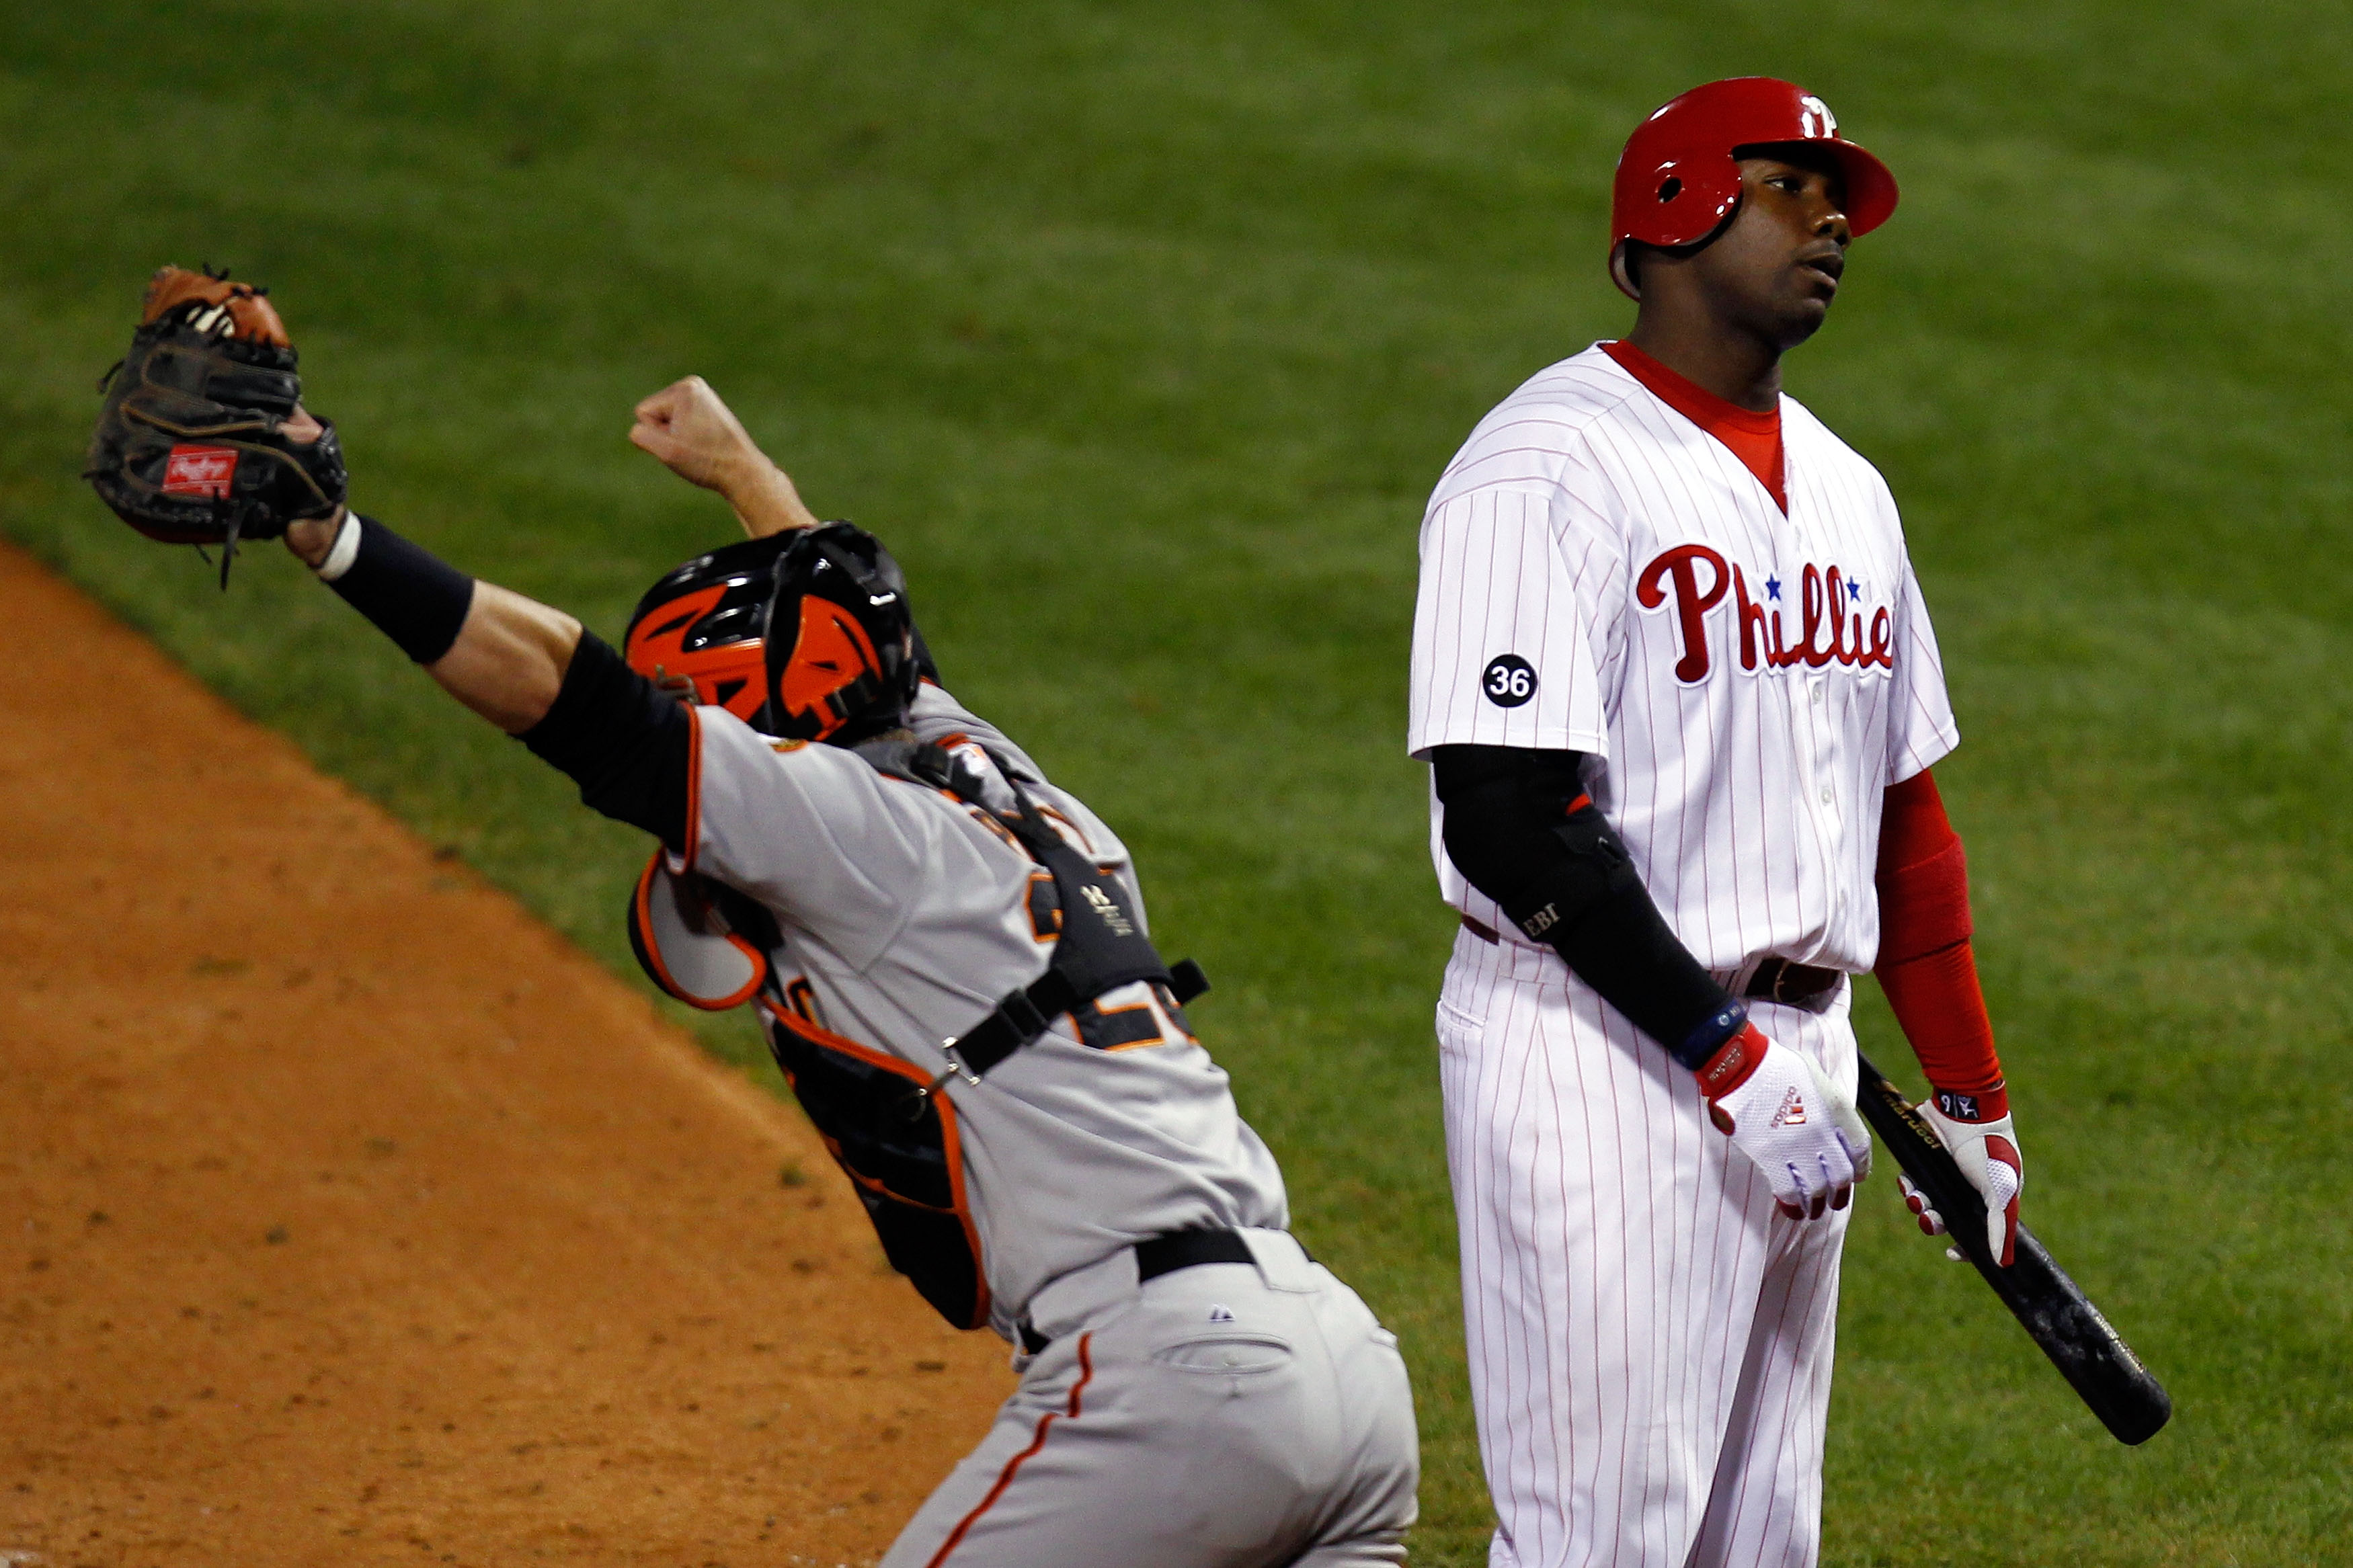 PHILADELPHIA - OCTOBER 23:  Ryan Howard #6 of the Philadelphia Phillies strikes out to end the game and lose as Buster Posey #25 of the San Francisco Giants celebrates in Game Six of the NLCS during the 2010 MLB Playoffs at Citizens Bank Park on October 2